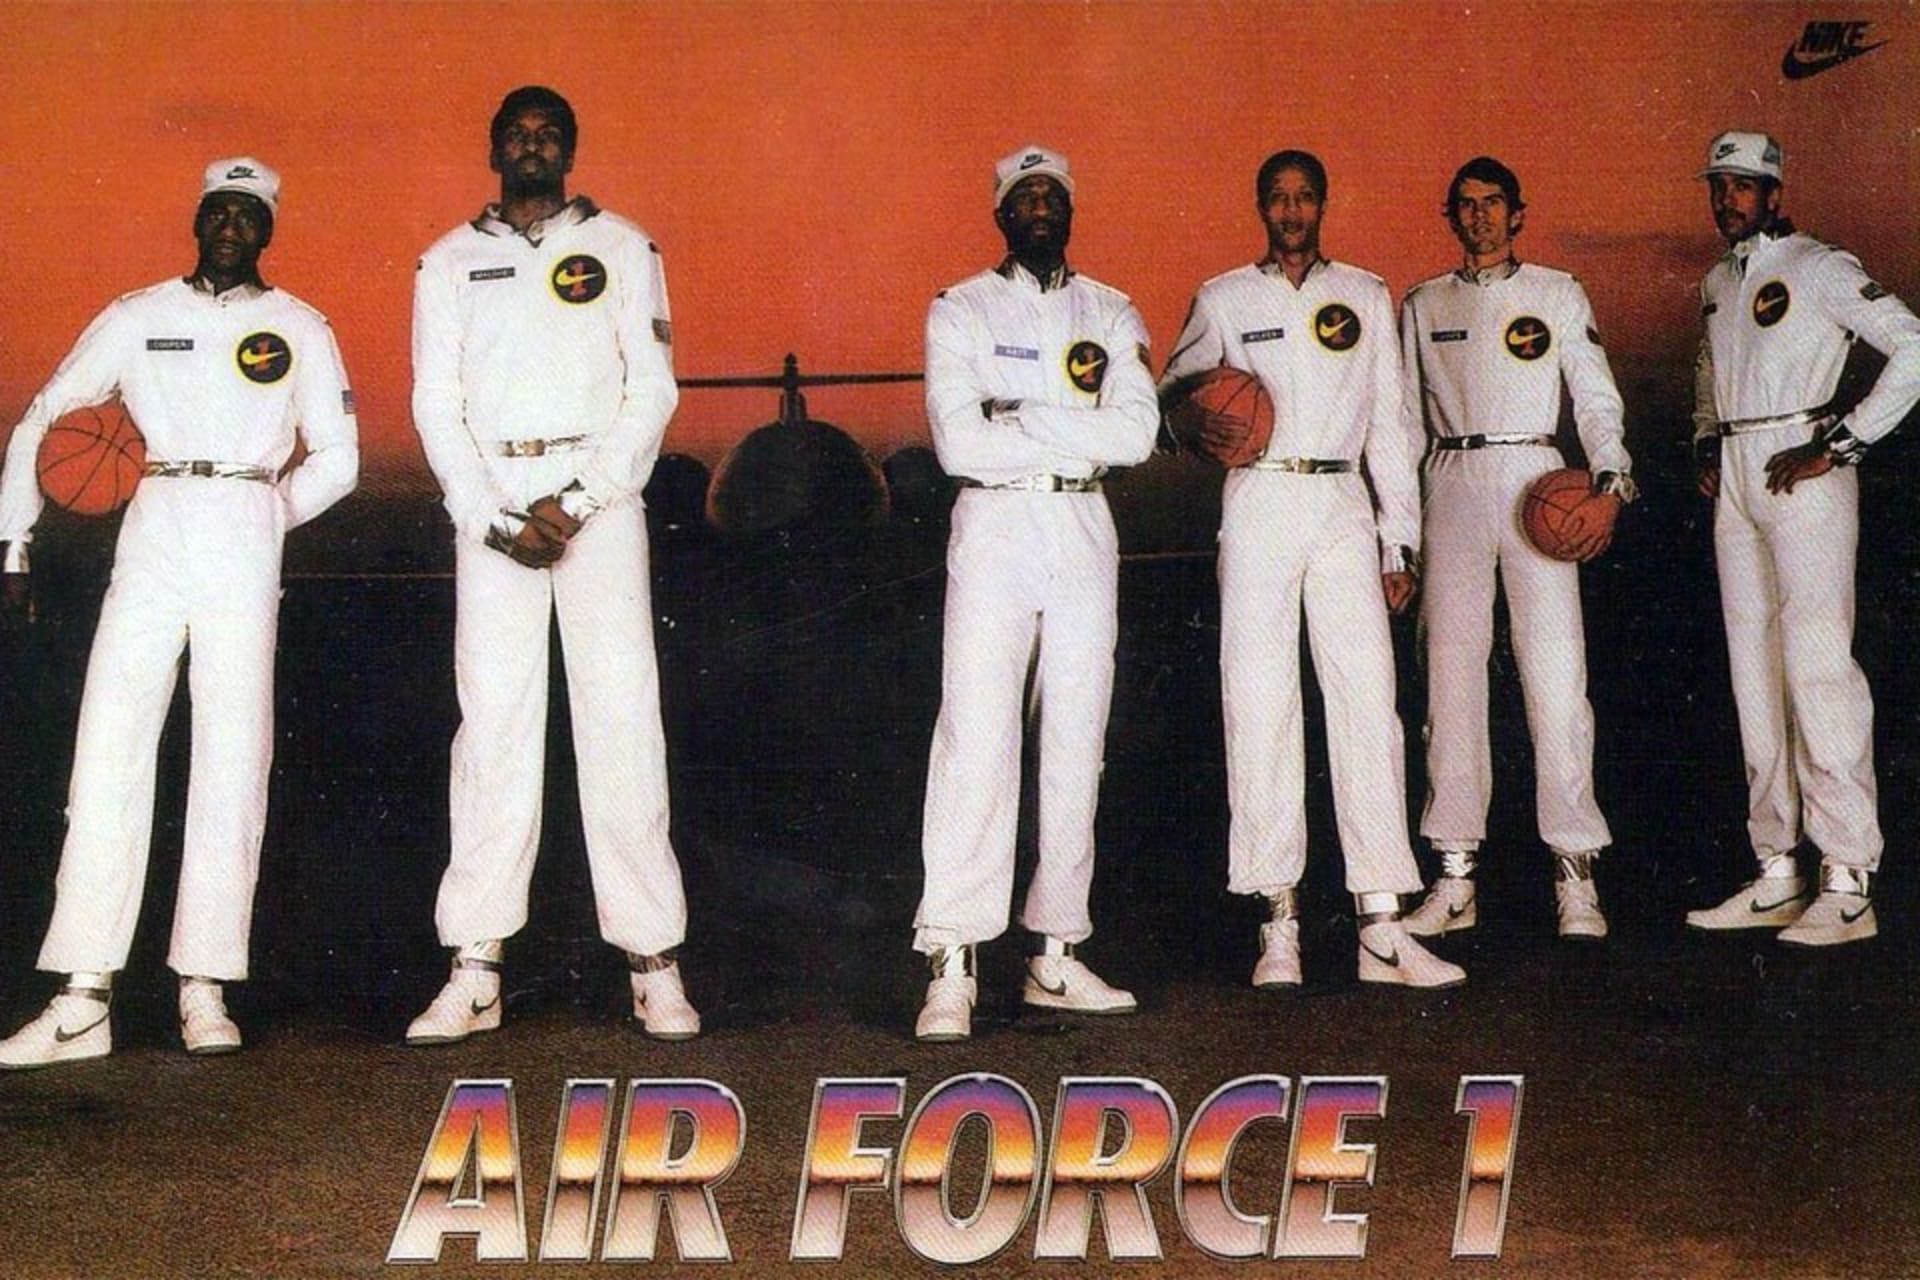 air force first release